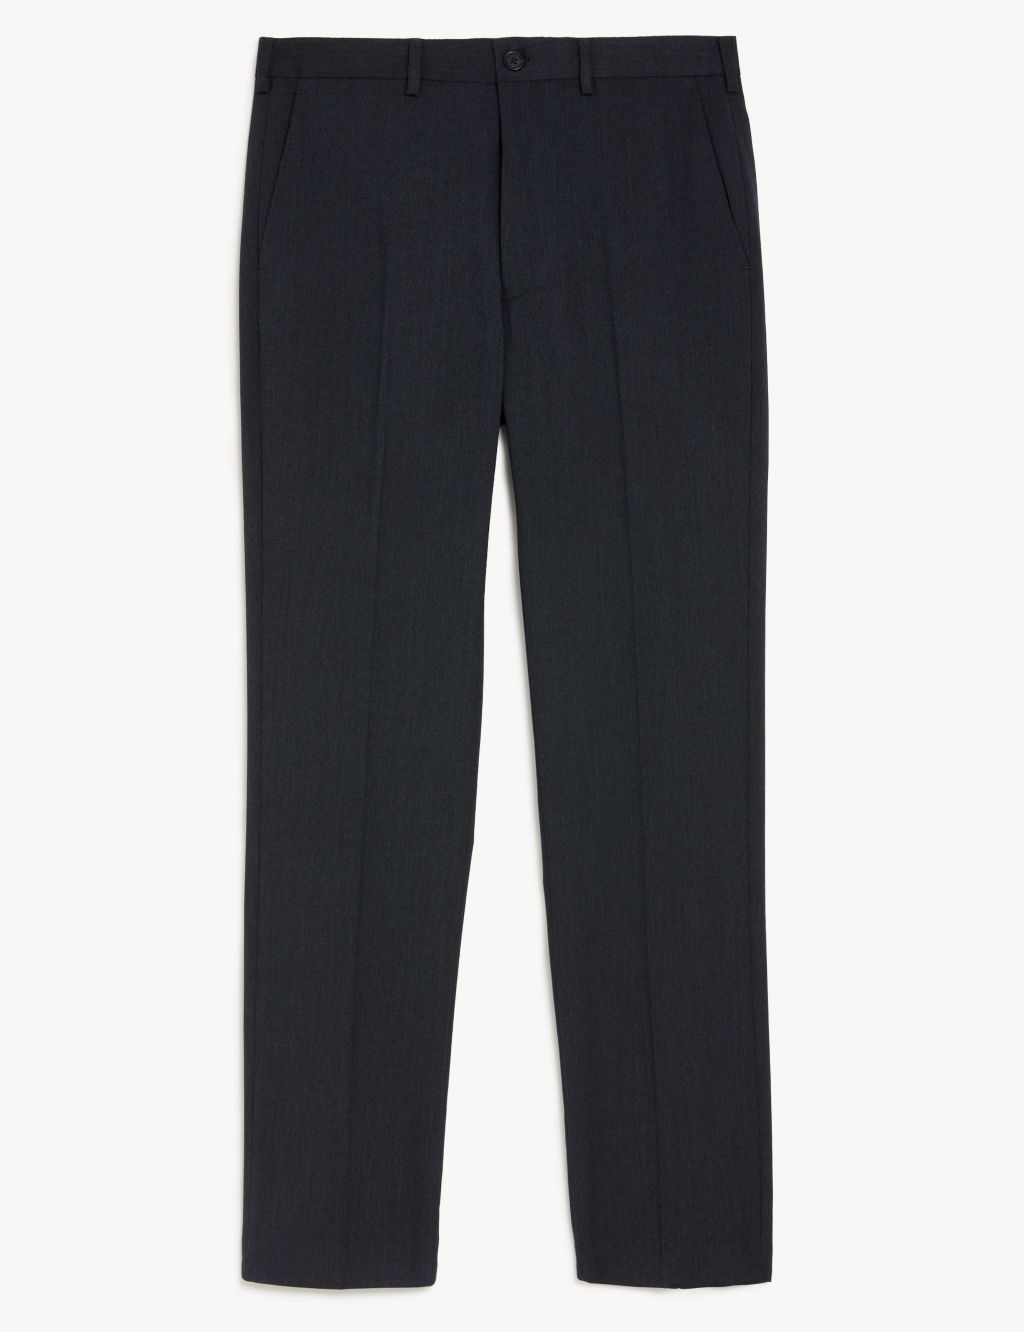 Tailored Fit Flat Front Stretch Trousers image 8